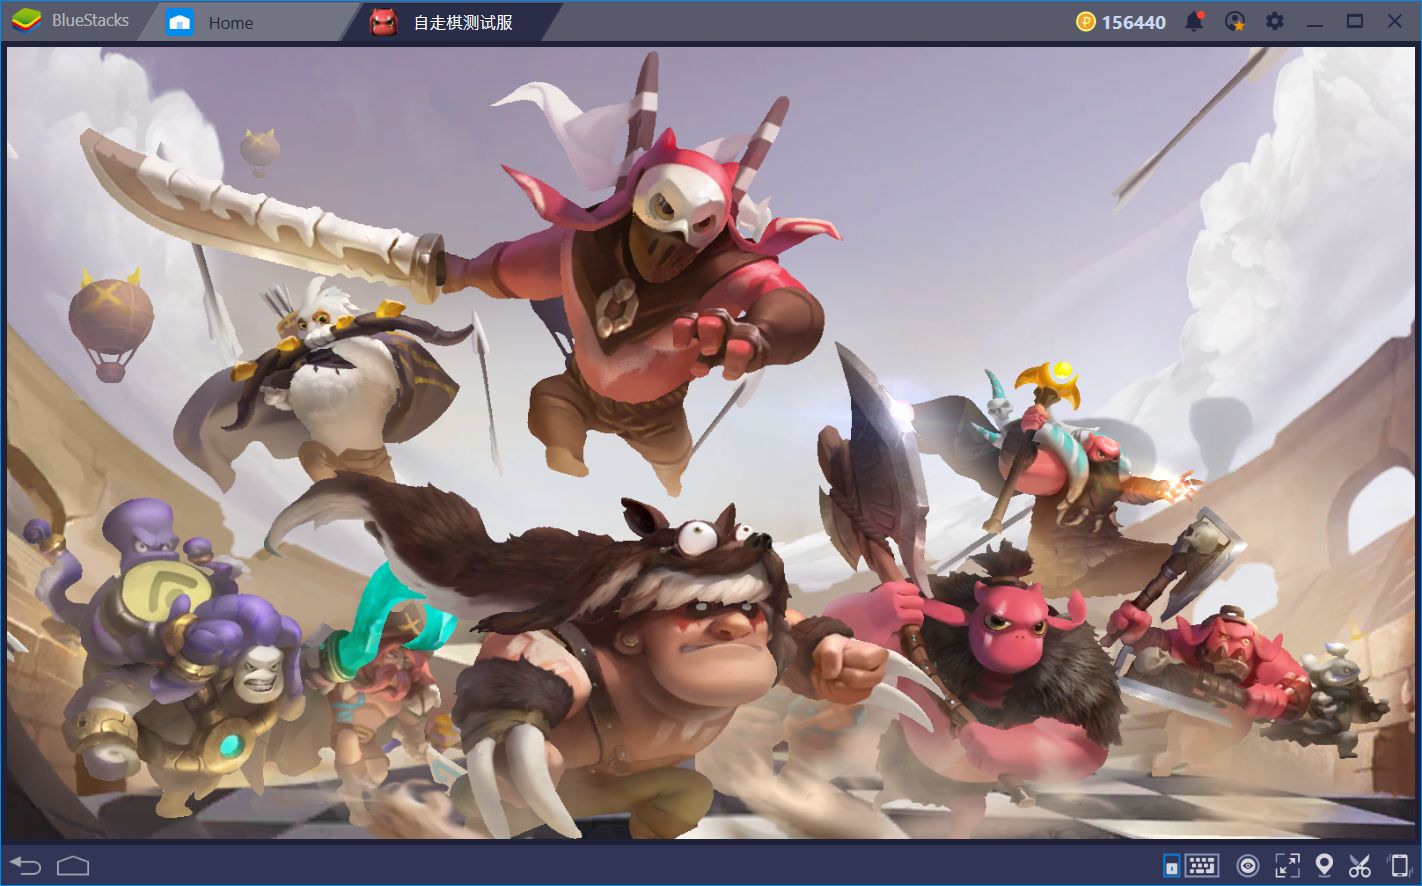 AutoChess MOBA starts early access in selected regions: Here's how